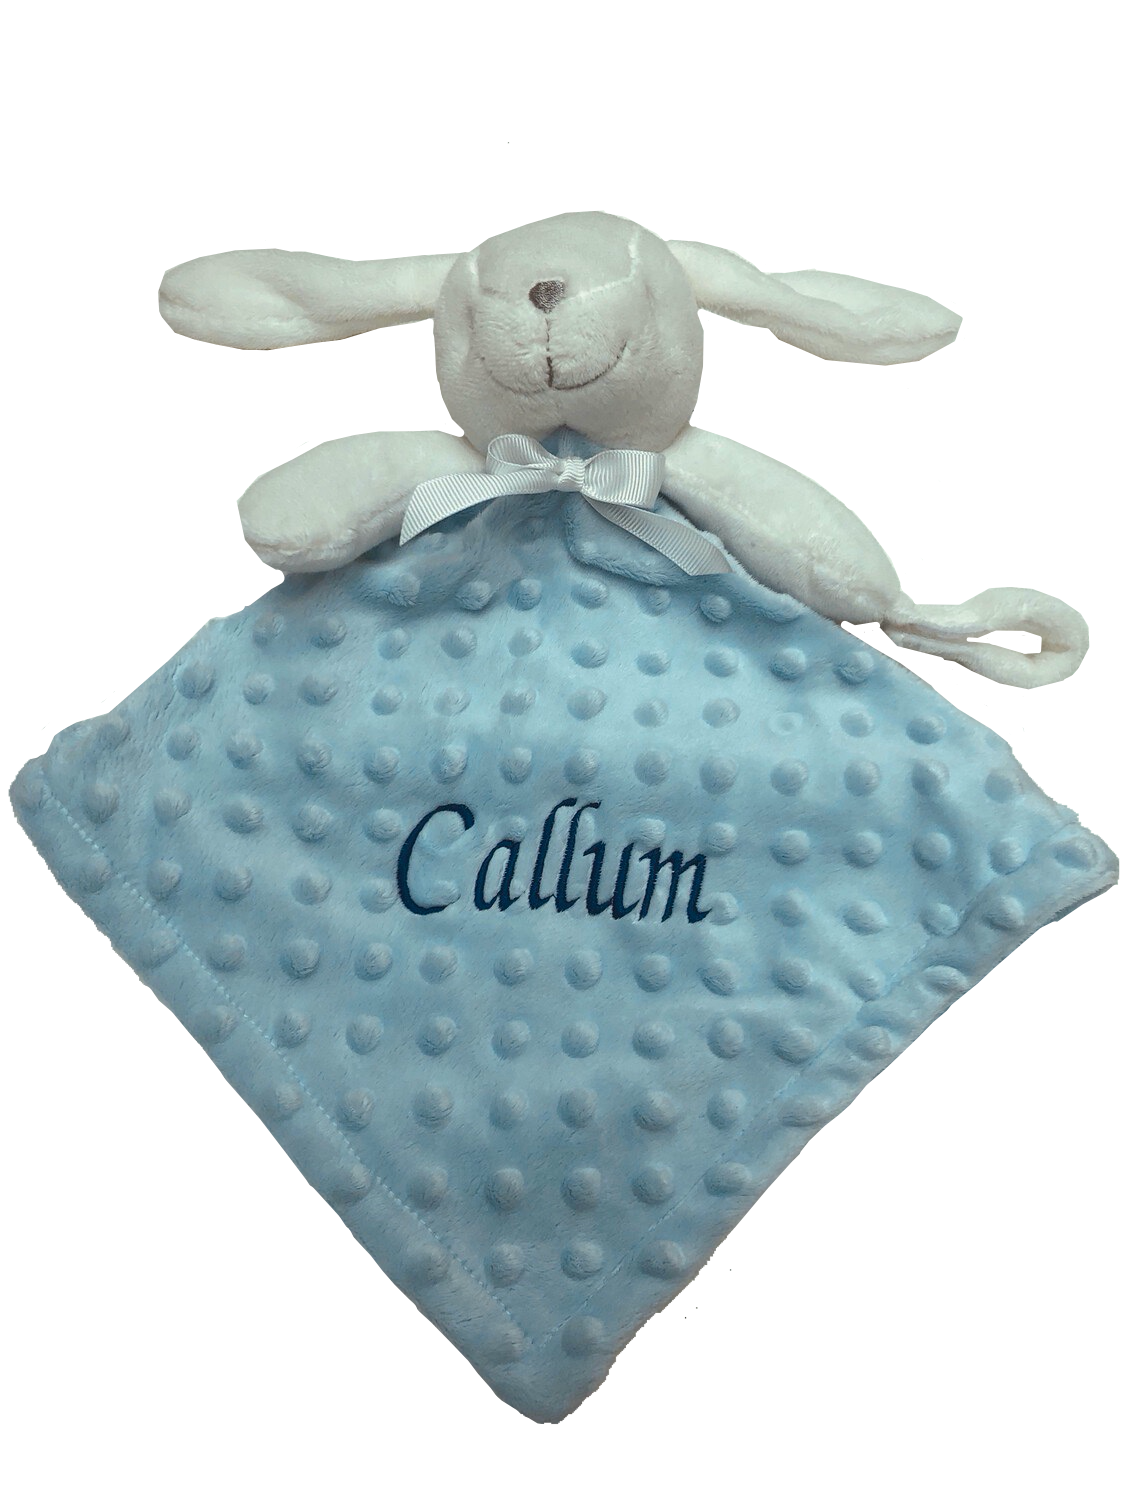 Personalised Blue Bunny Dimple Comforter